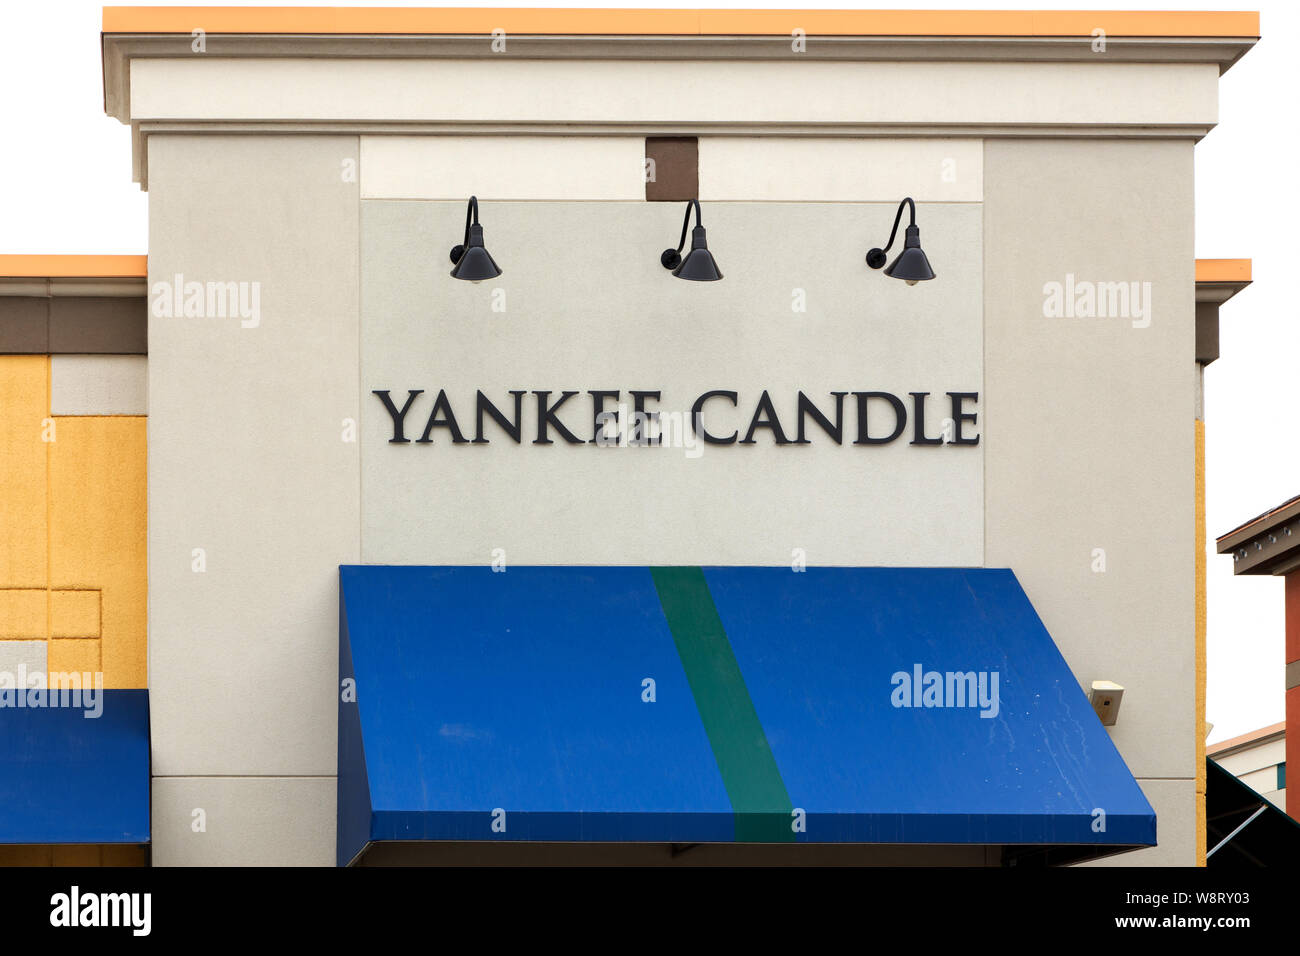 MAPLE GROVE, MN/USA - JANUARY 16, 2015:  Yankee Candle retail store exterior. The Yankee Candle Company is an American manufacturer and retailer of sc Stock Photo